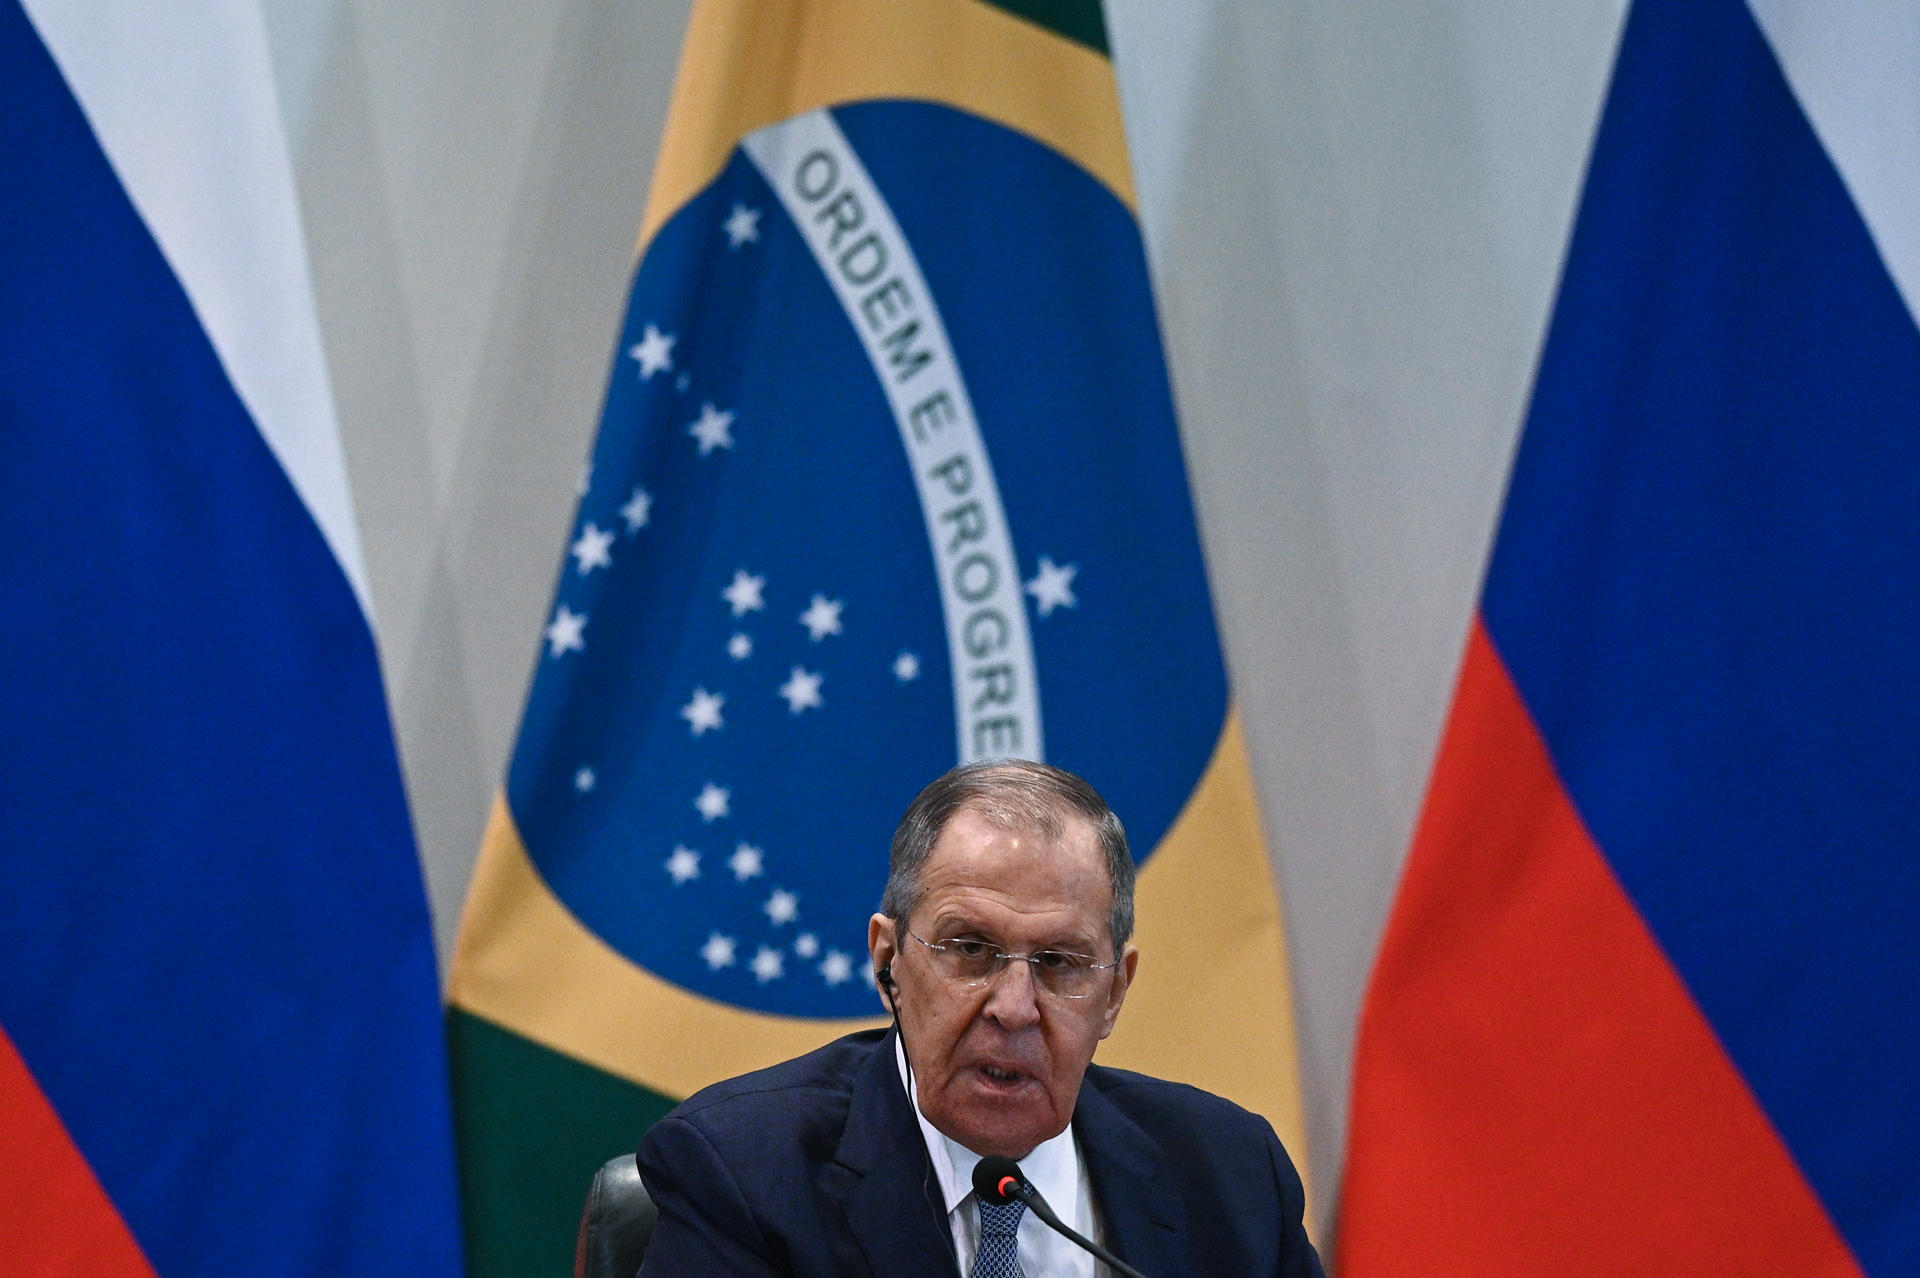 Russian Foreign Minister Sergey Lavrov speaks at a press conference on 17 April 2023 after meeting with Brazilian counterpart Mauro Vieira at Itamaraty Palace in Brasilia, Brazil. EFE/Andre Borges